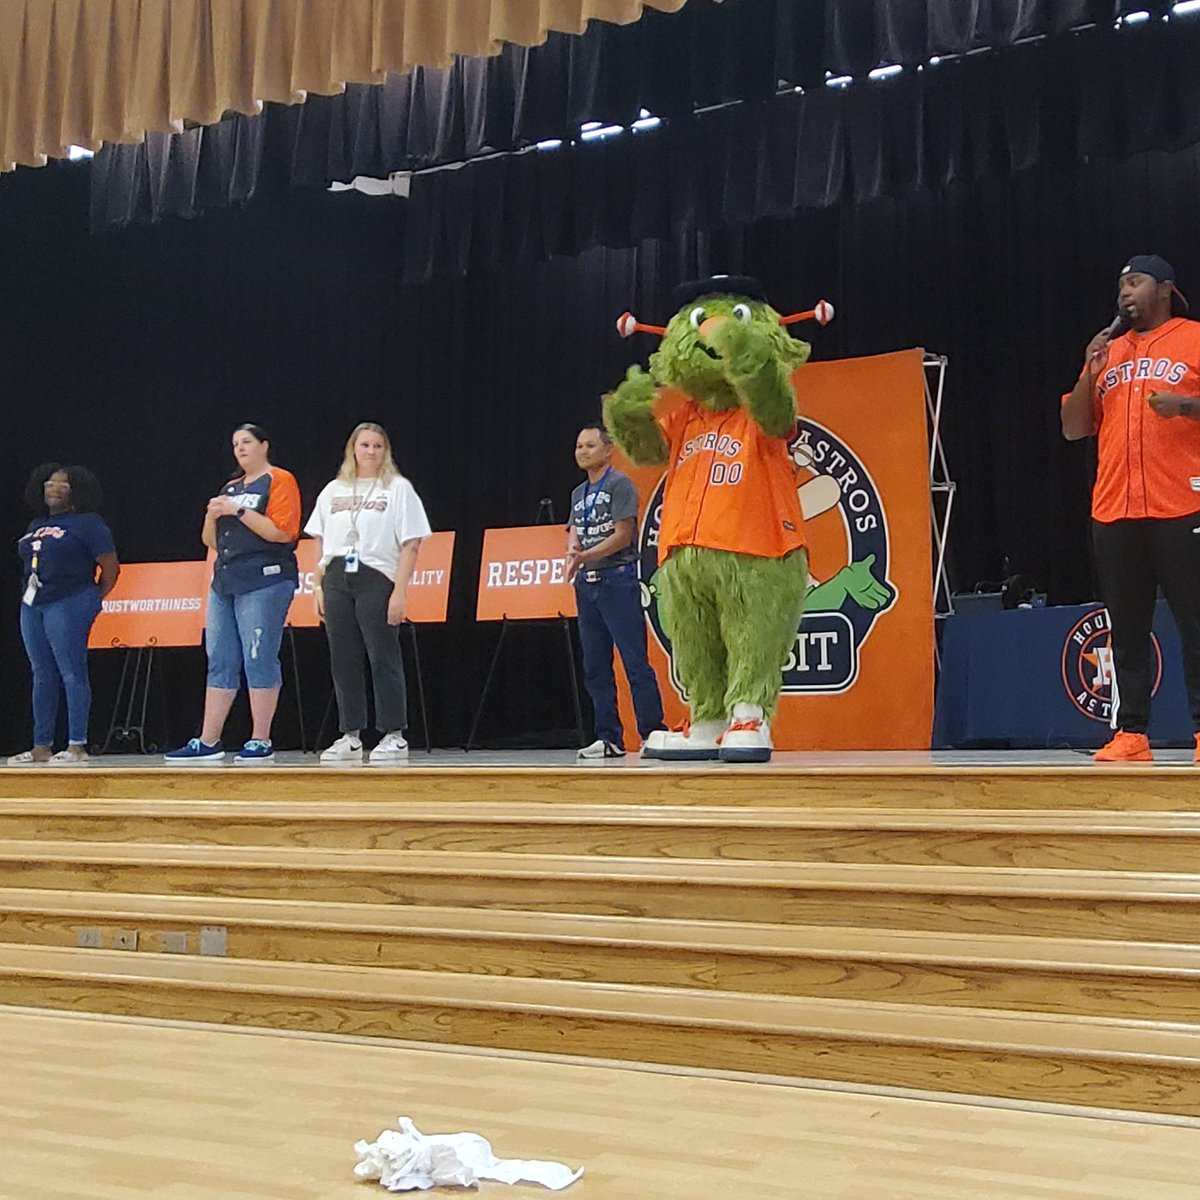 Dance-off with Orbit!! The kids and teachers had so much fun. Thanks, PTA!!